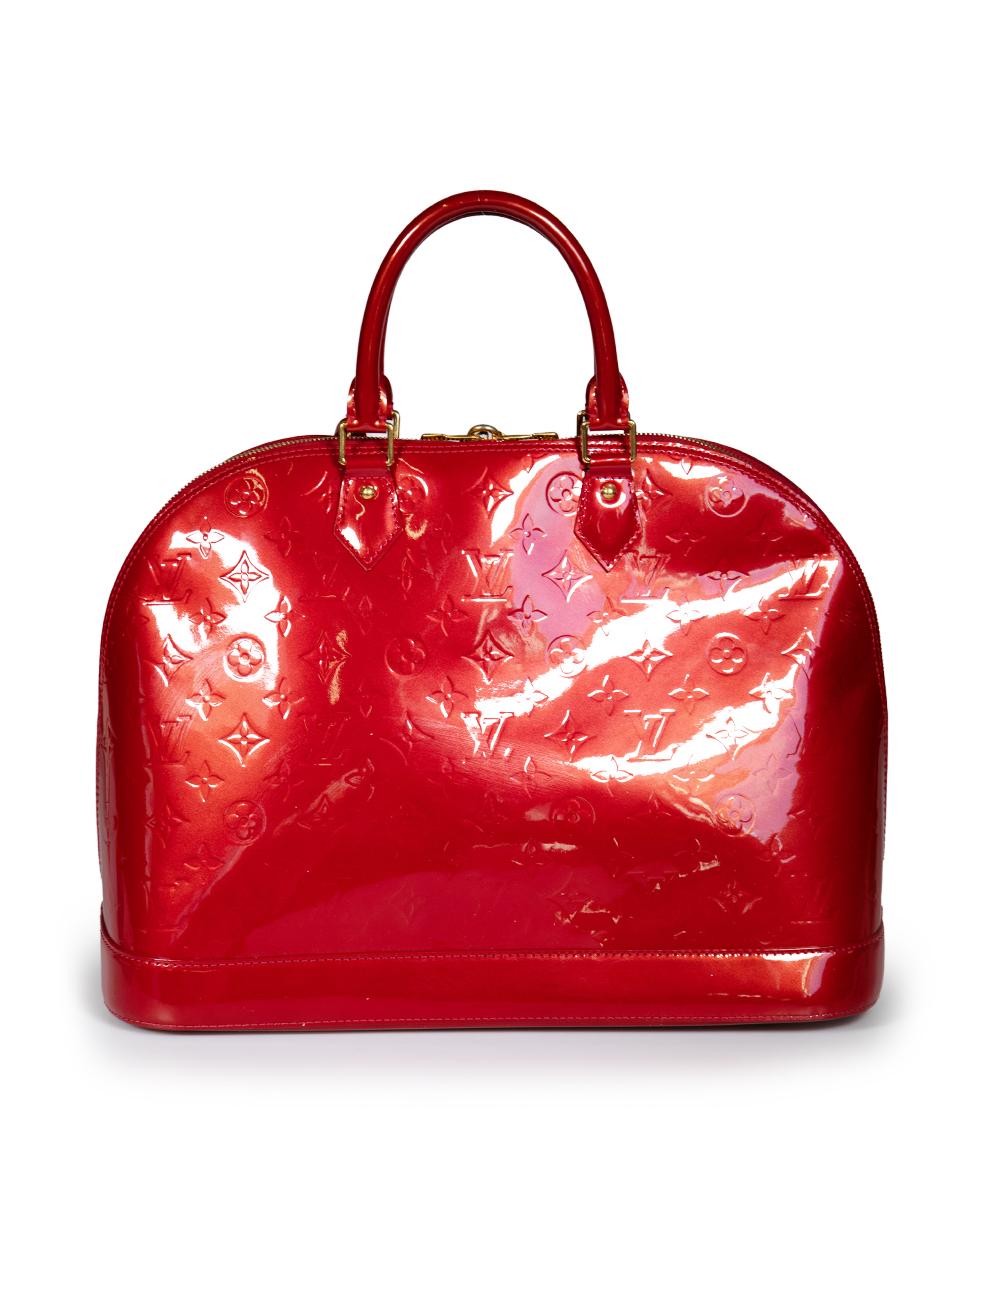 Louis Vuitton 2013 Red Patent Leather Vernis Alma GM In Good Condition For Sale In London, GB